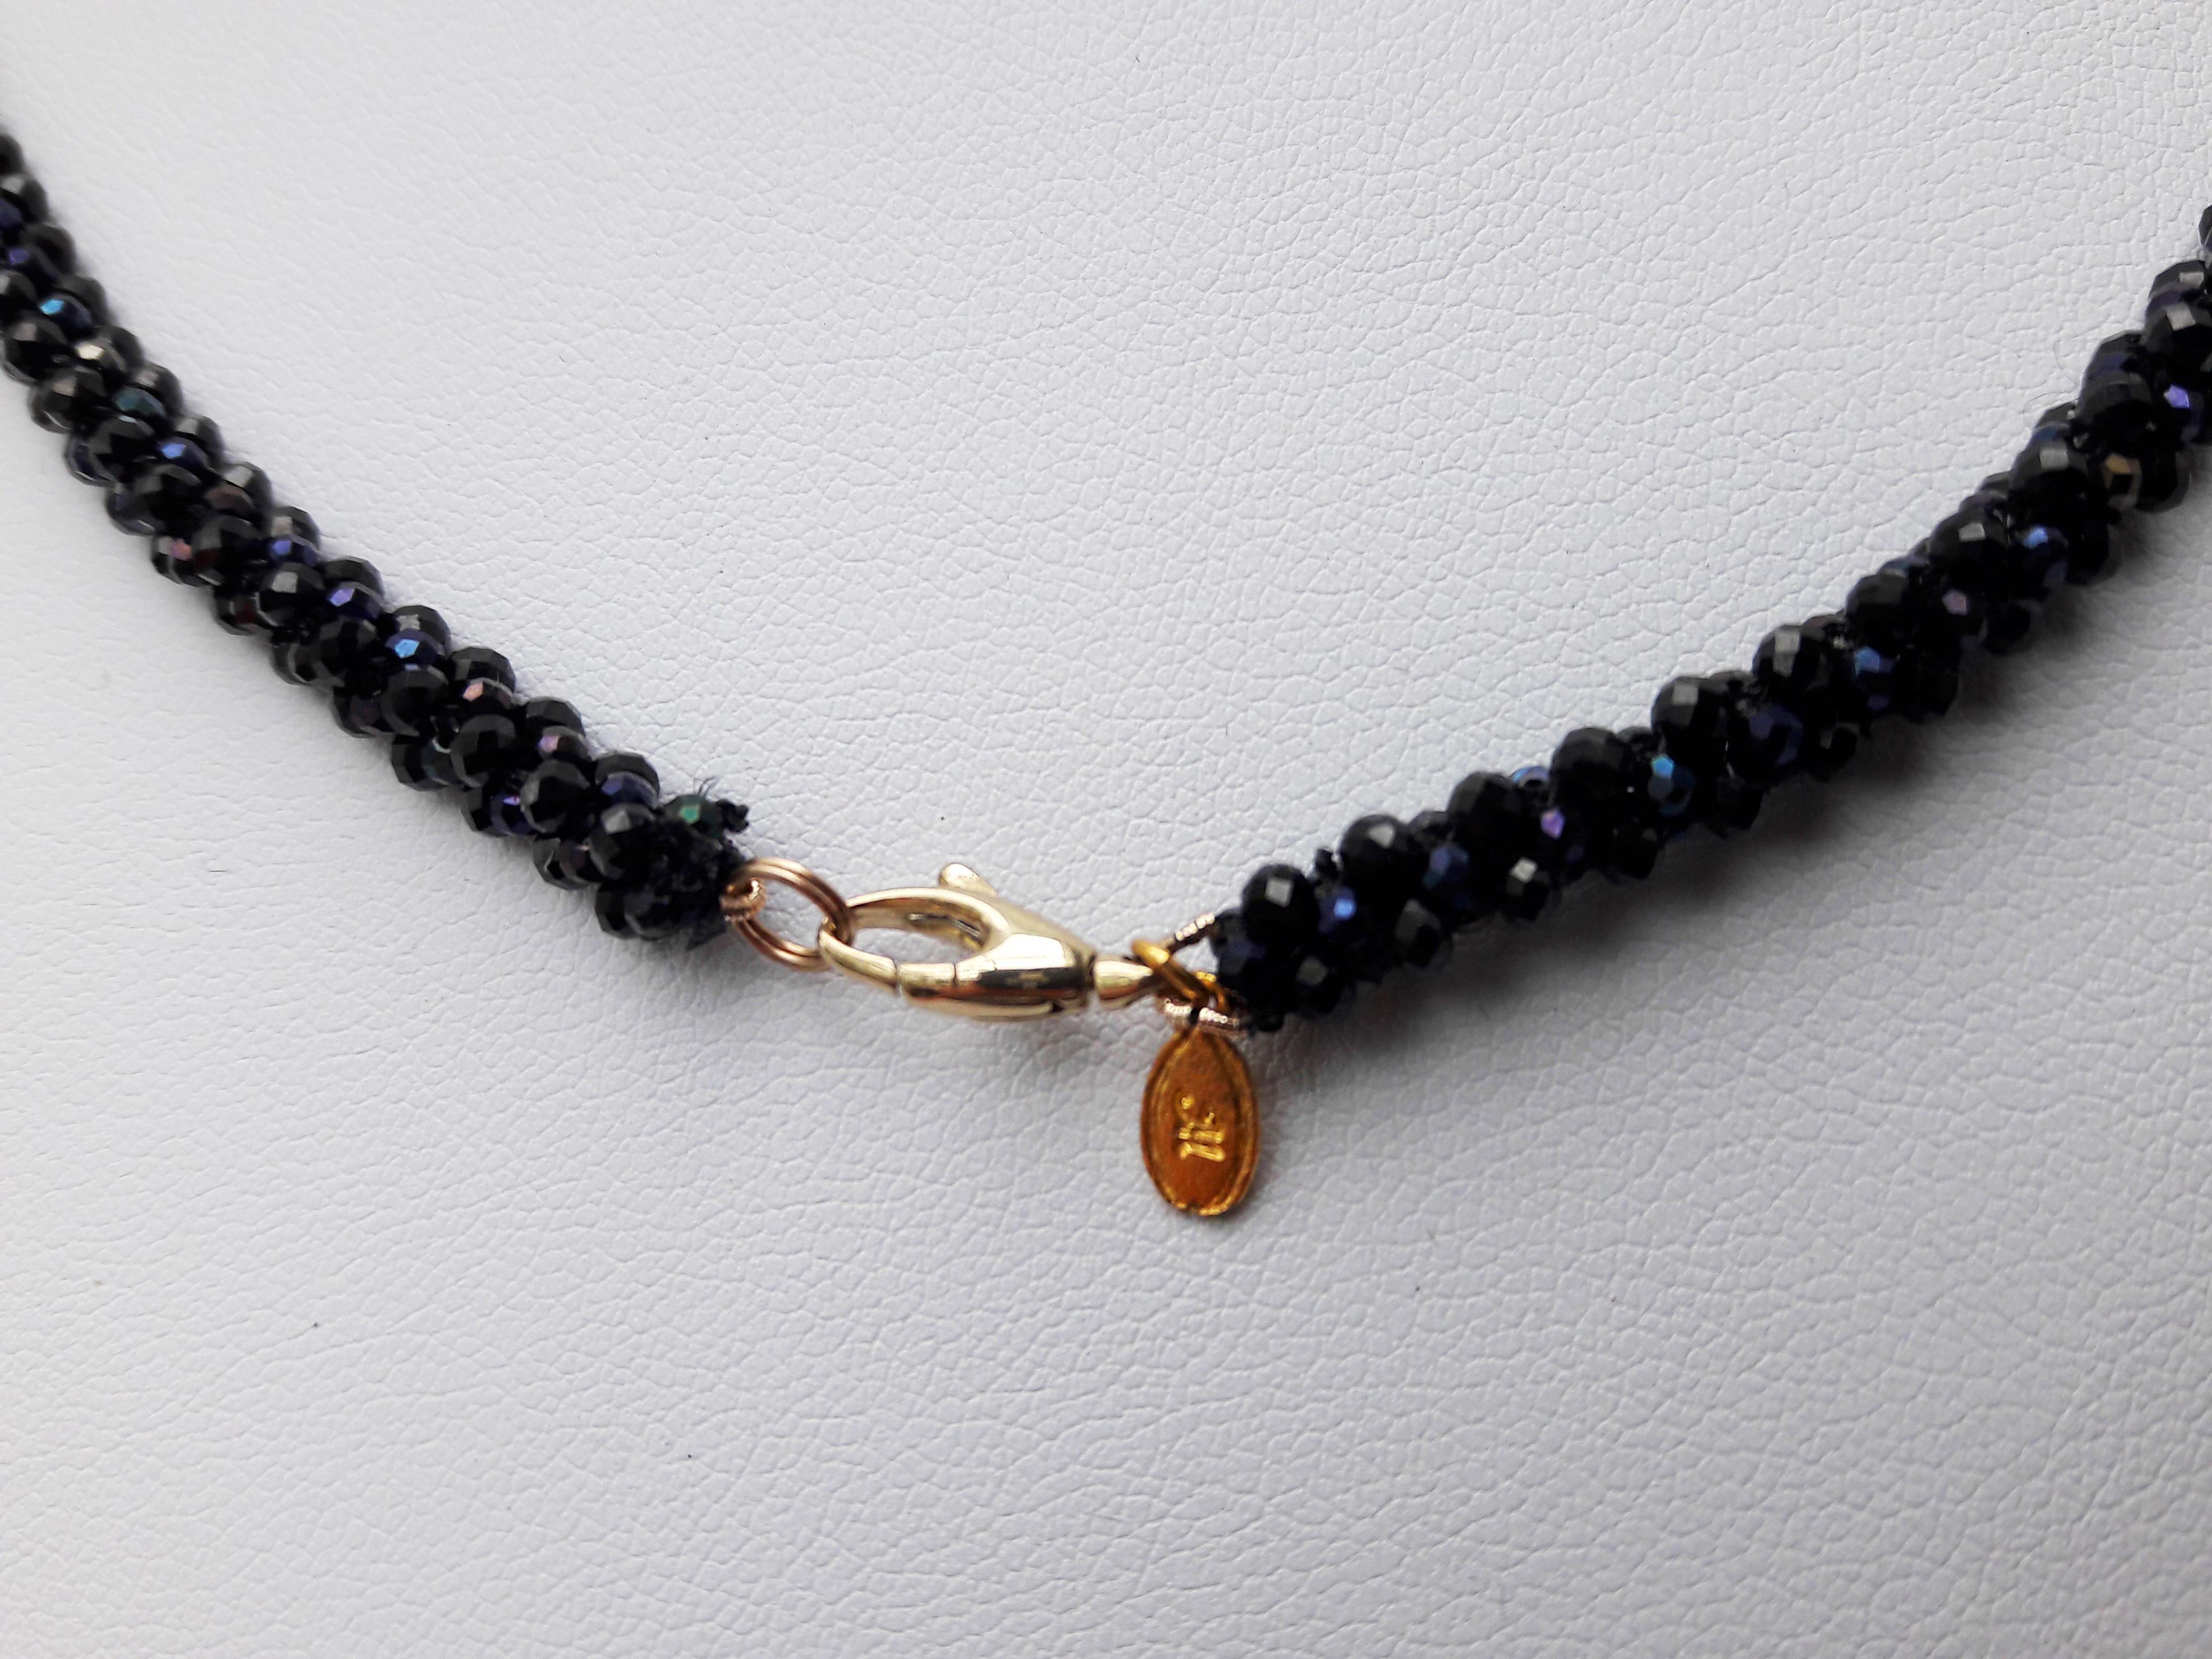 Women's Marina J. Blue & Black Faceted Spinel Beaded Rope Necklace with 14K Gold Clasp